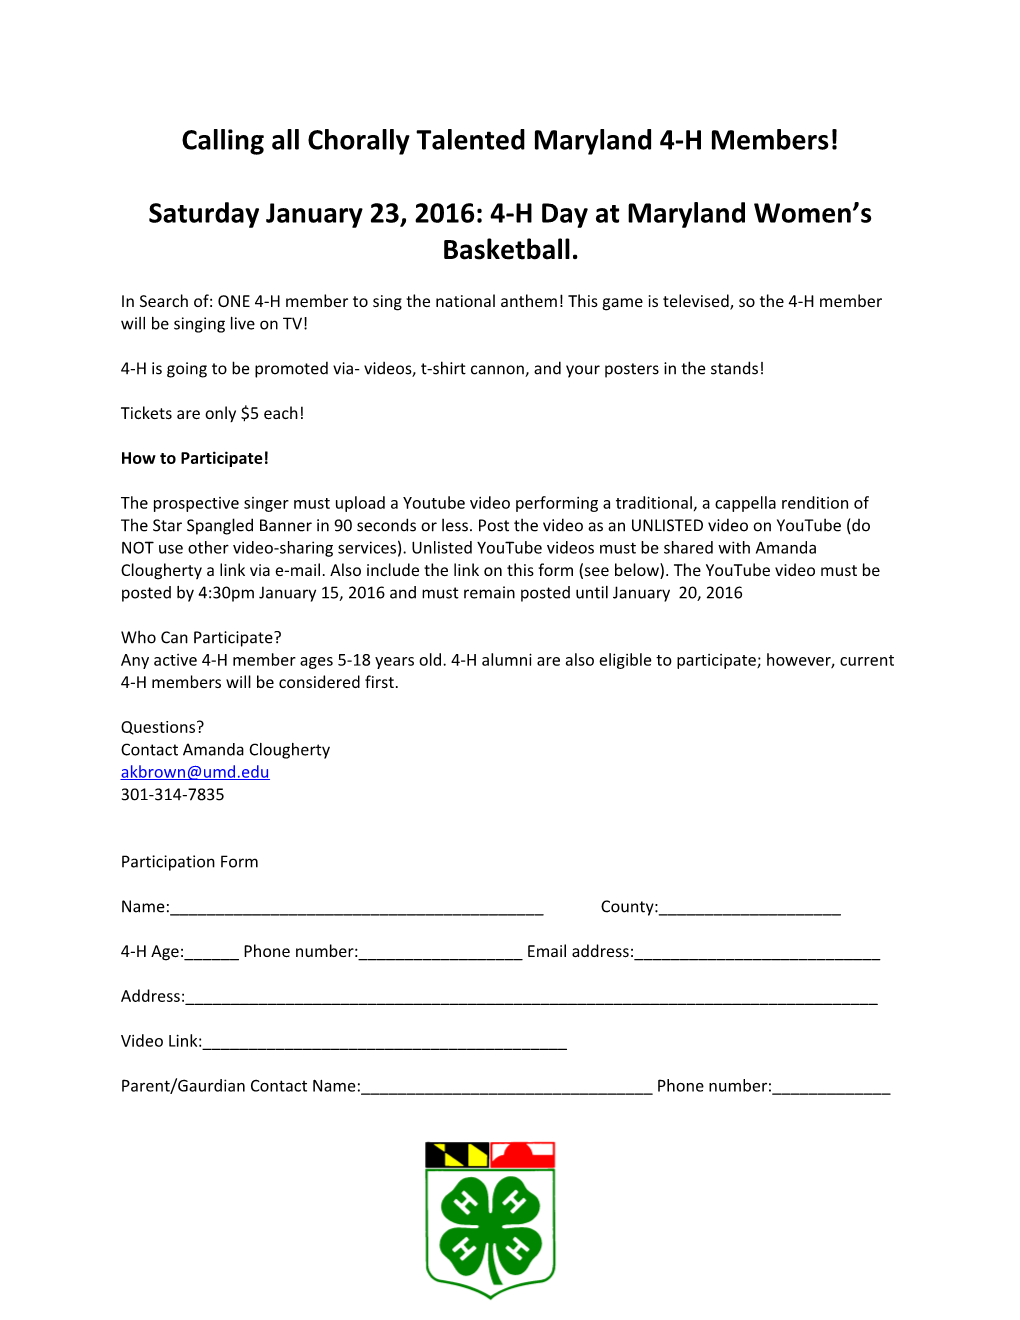 Calling All Chorally Talented Maryland 4-H Members!